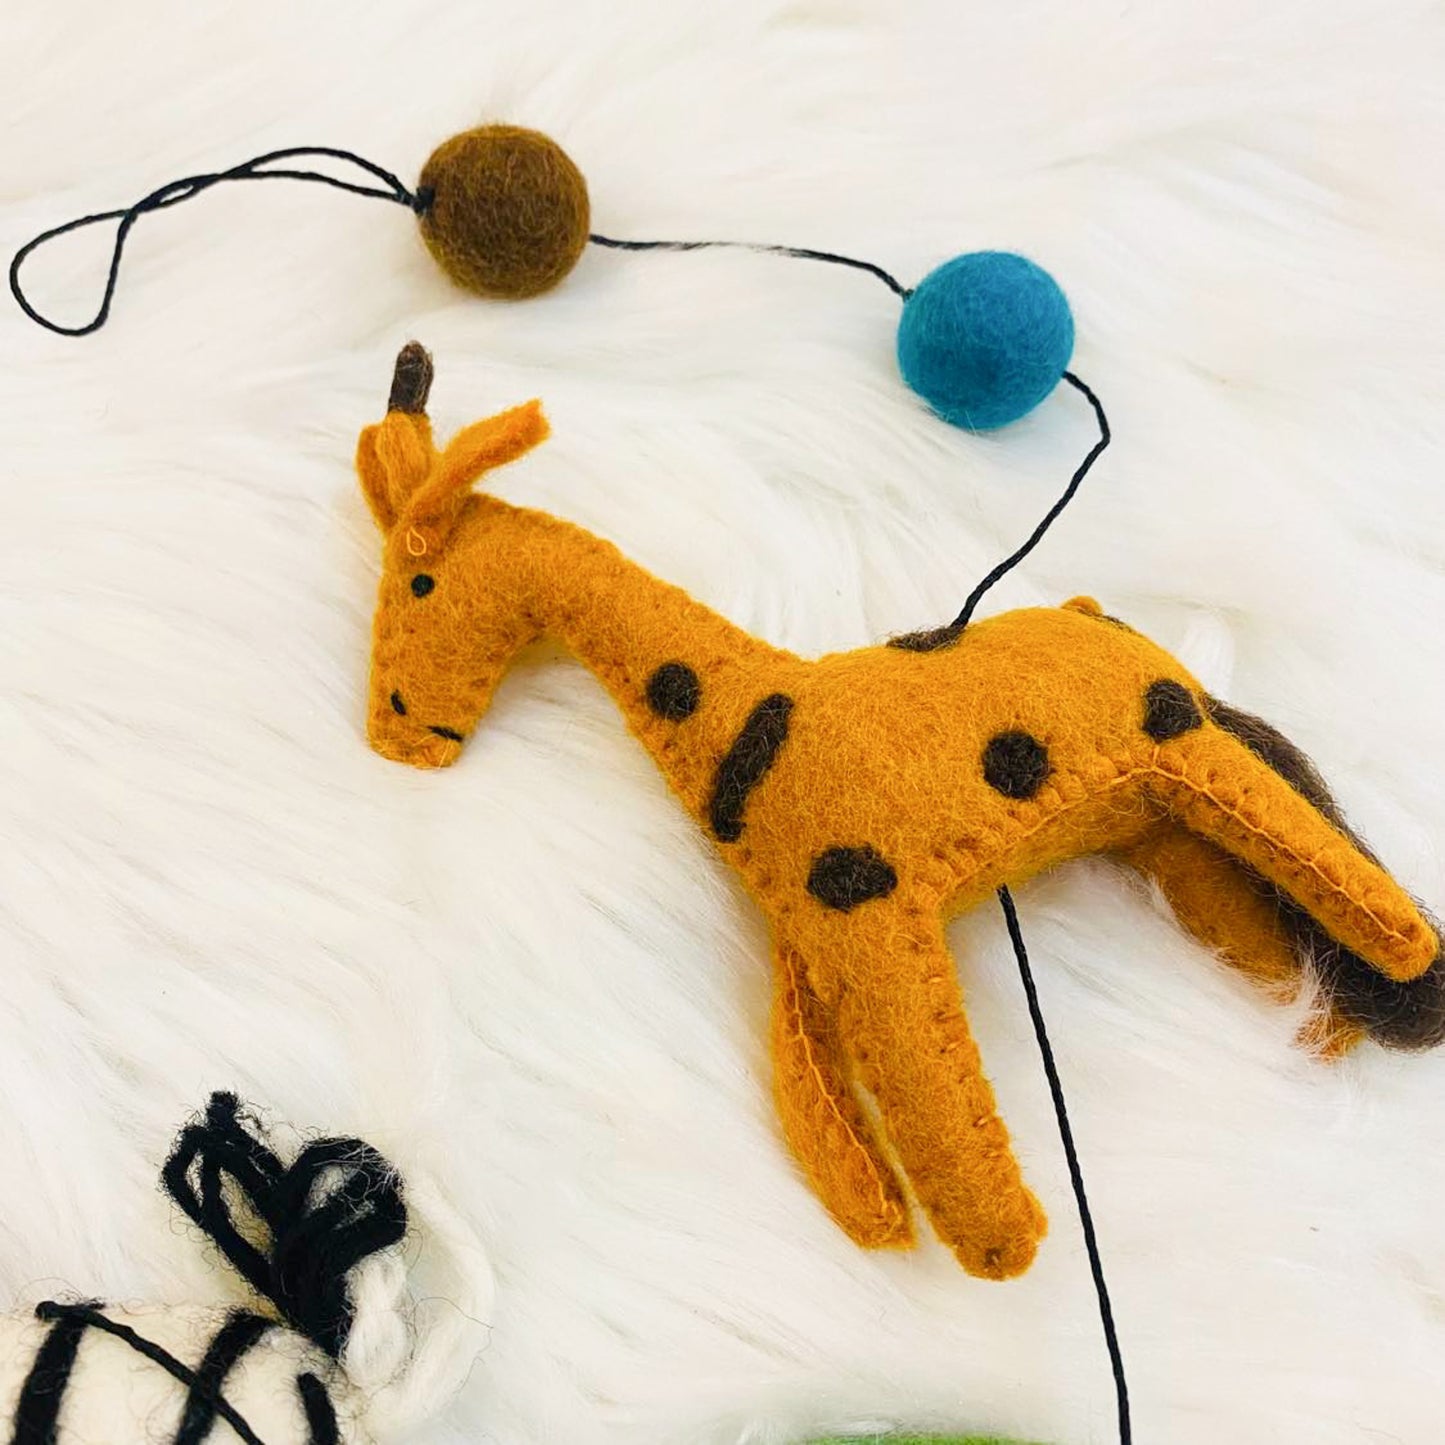 Felted Animal Jungle Hanging with Bells